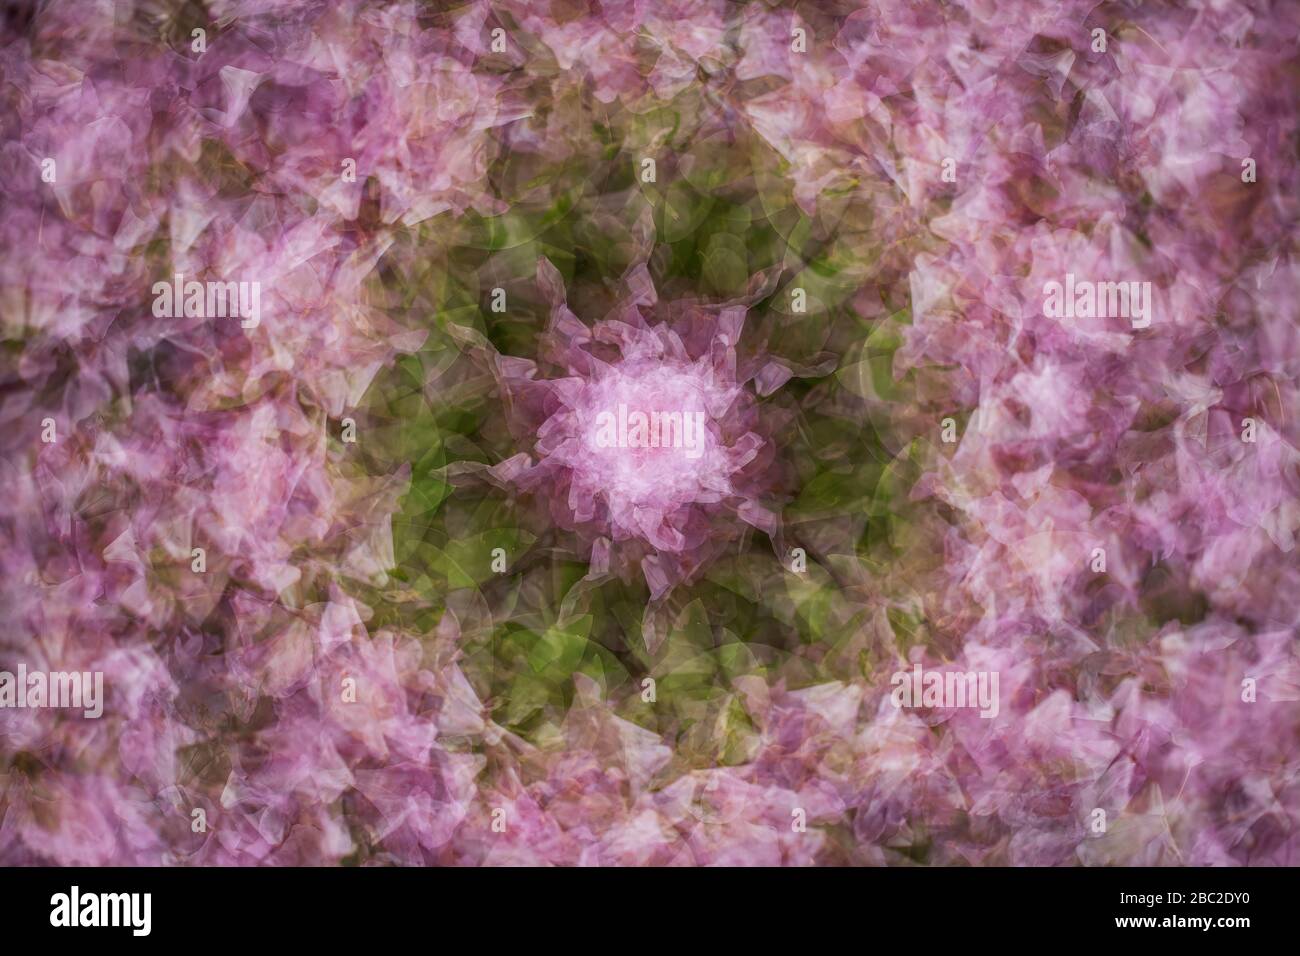 Multiple exposure image of a cluster of pink flowers. Stock Photo